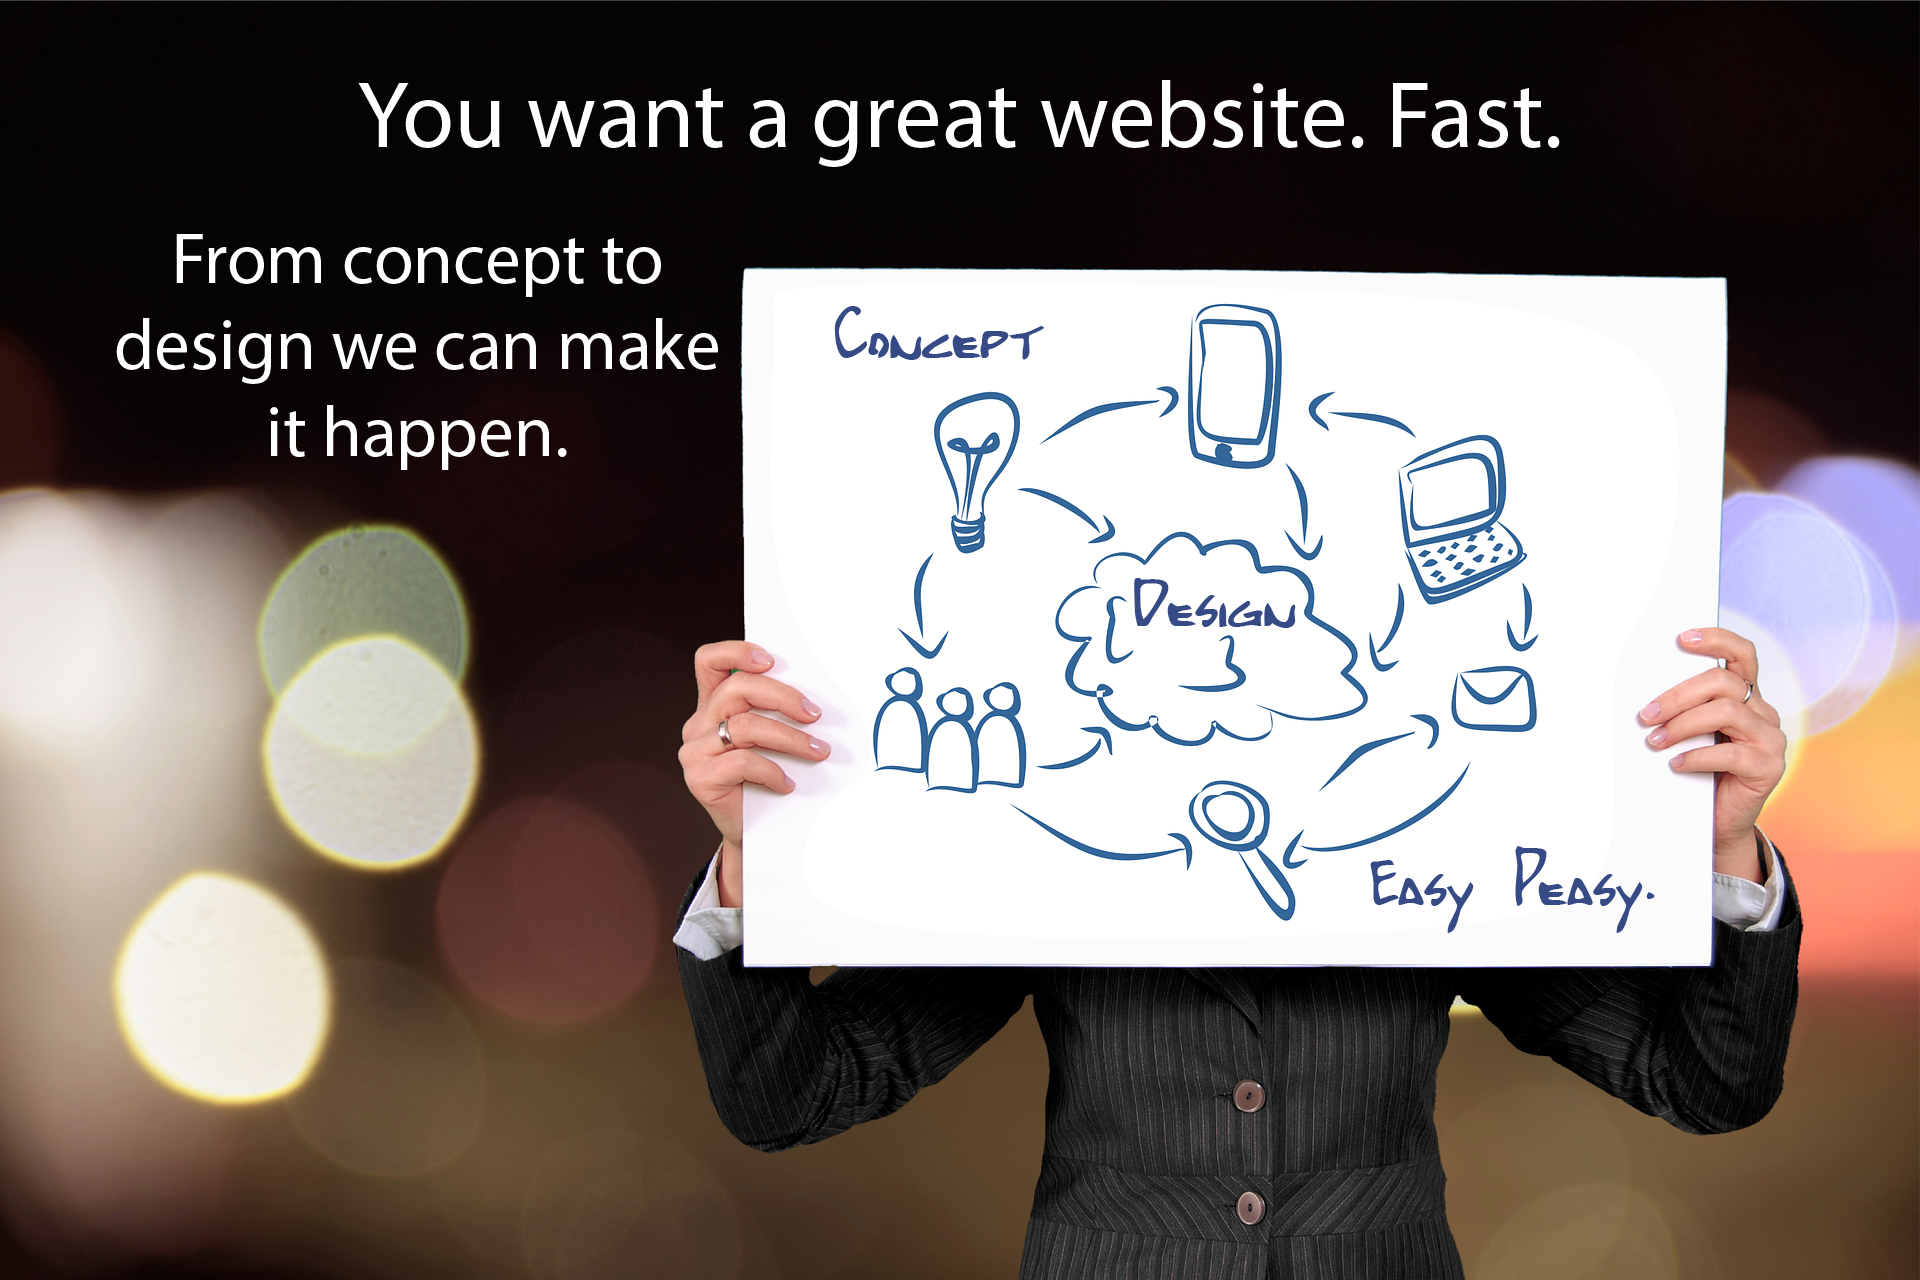 Website design from concept to design. Easy Peasy.